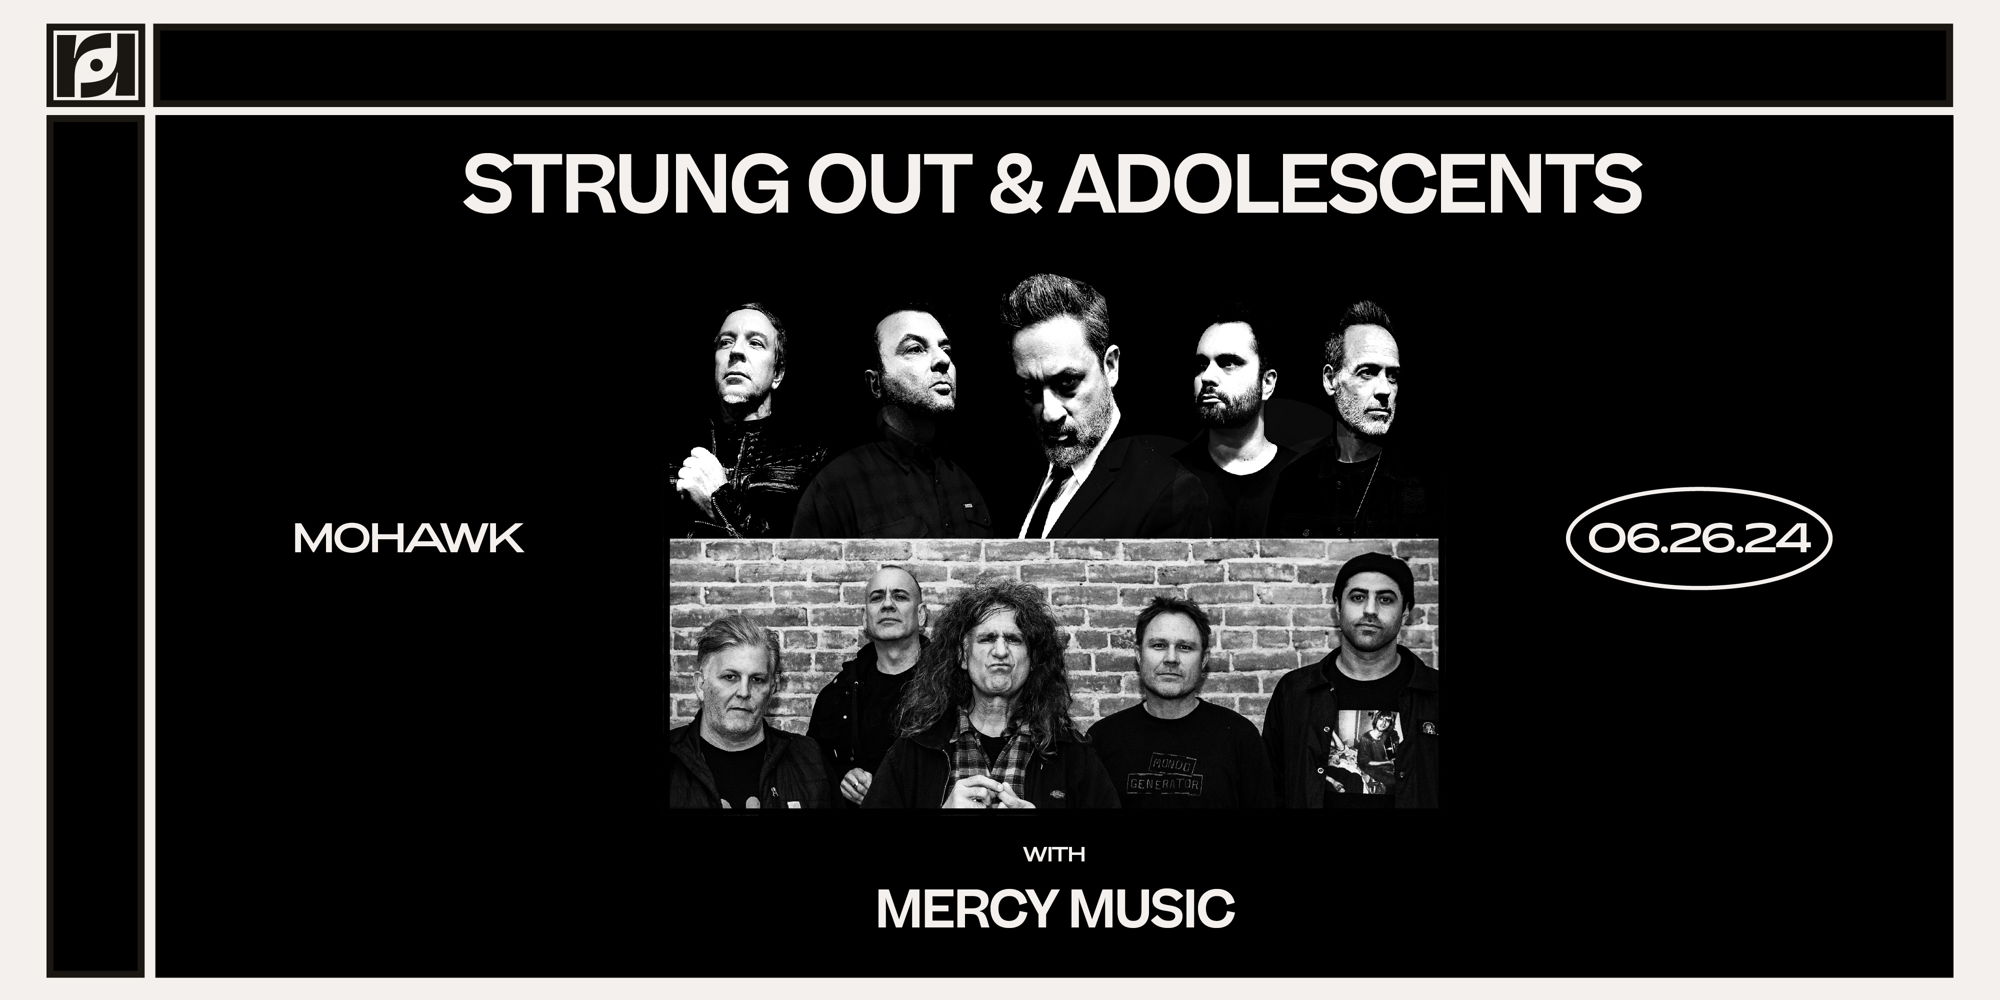 Resound Presents: Strung Out & Adolescents w/ Mercy Music at Mohawk promotional image